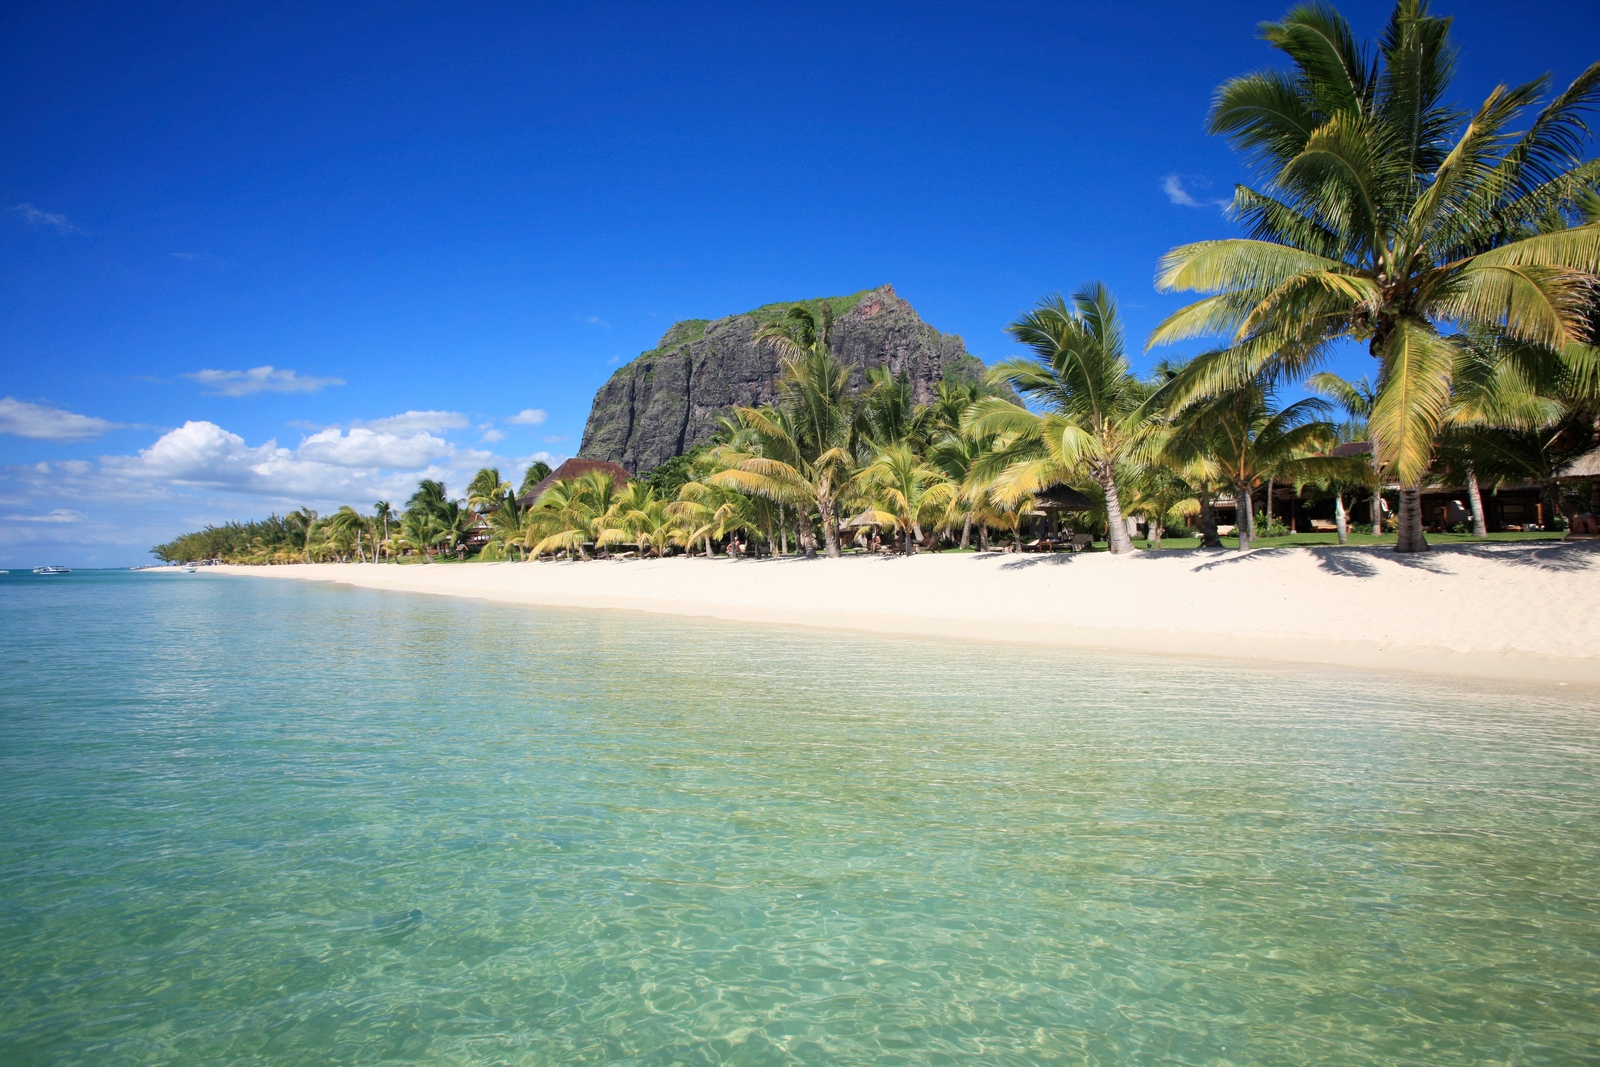 Beach and Le Morne in the background at LUX* le Morne, Mauritius